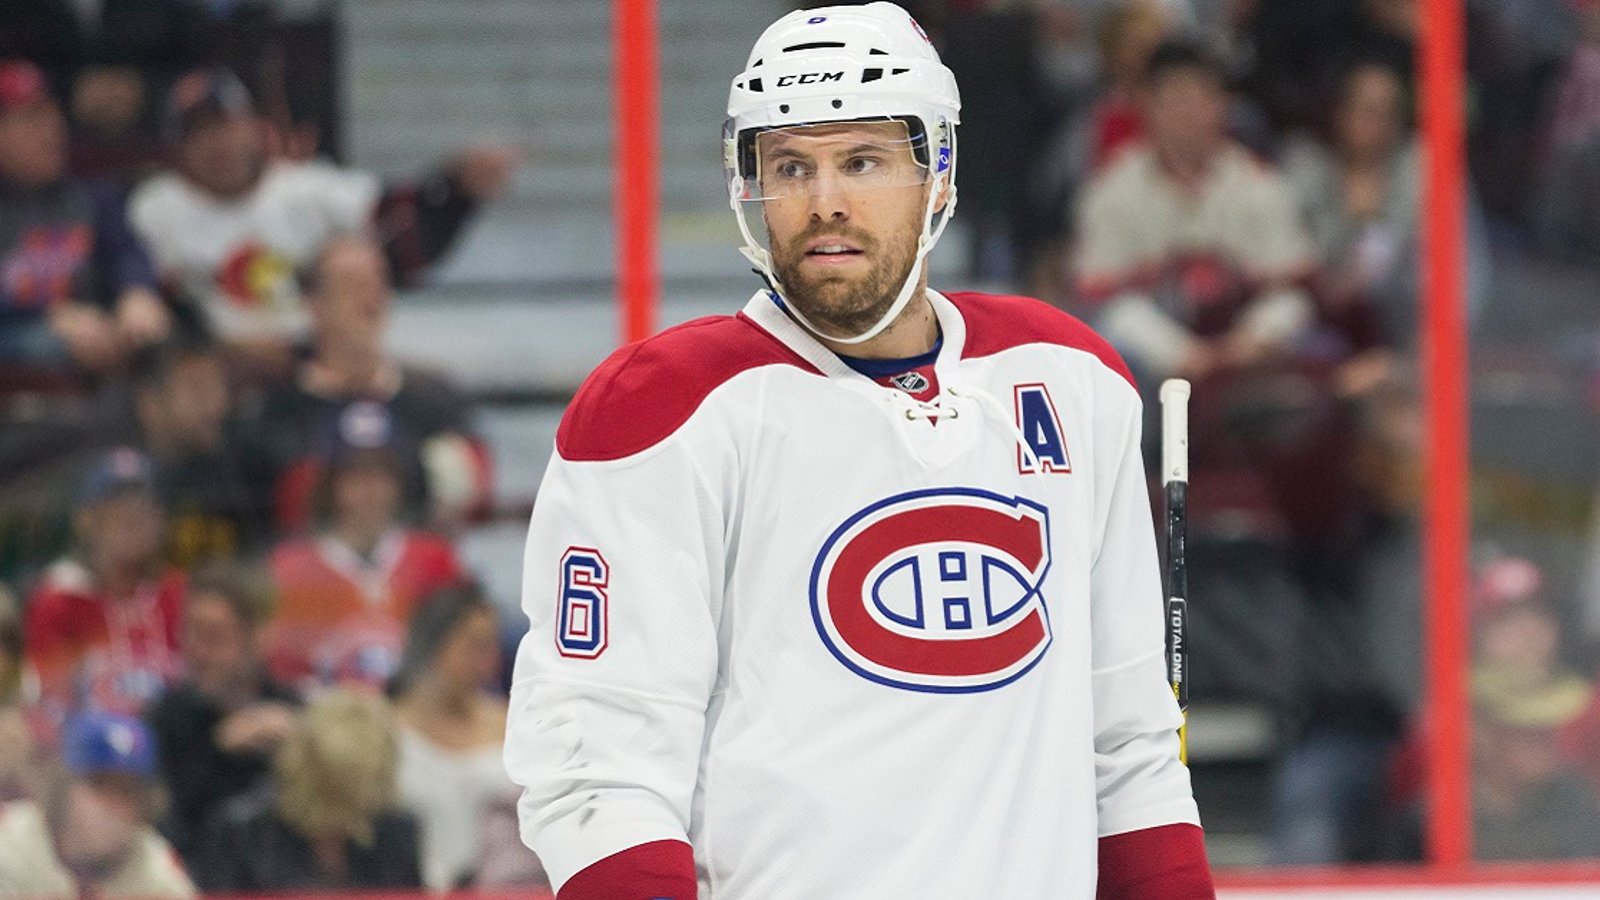 Breaking: Shea Weber makes shocking comments about the current state of the Habs.